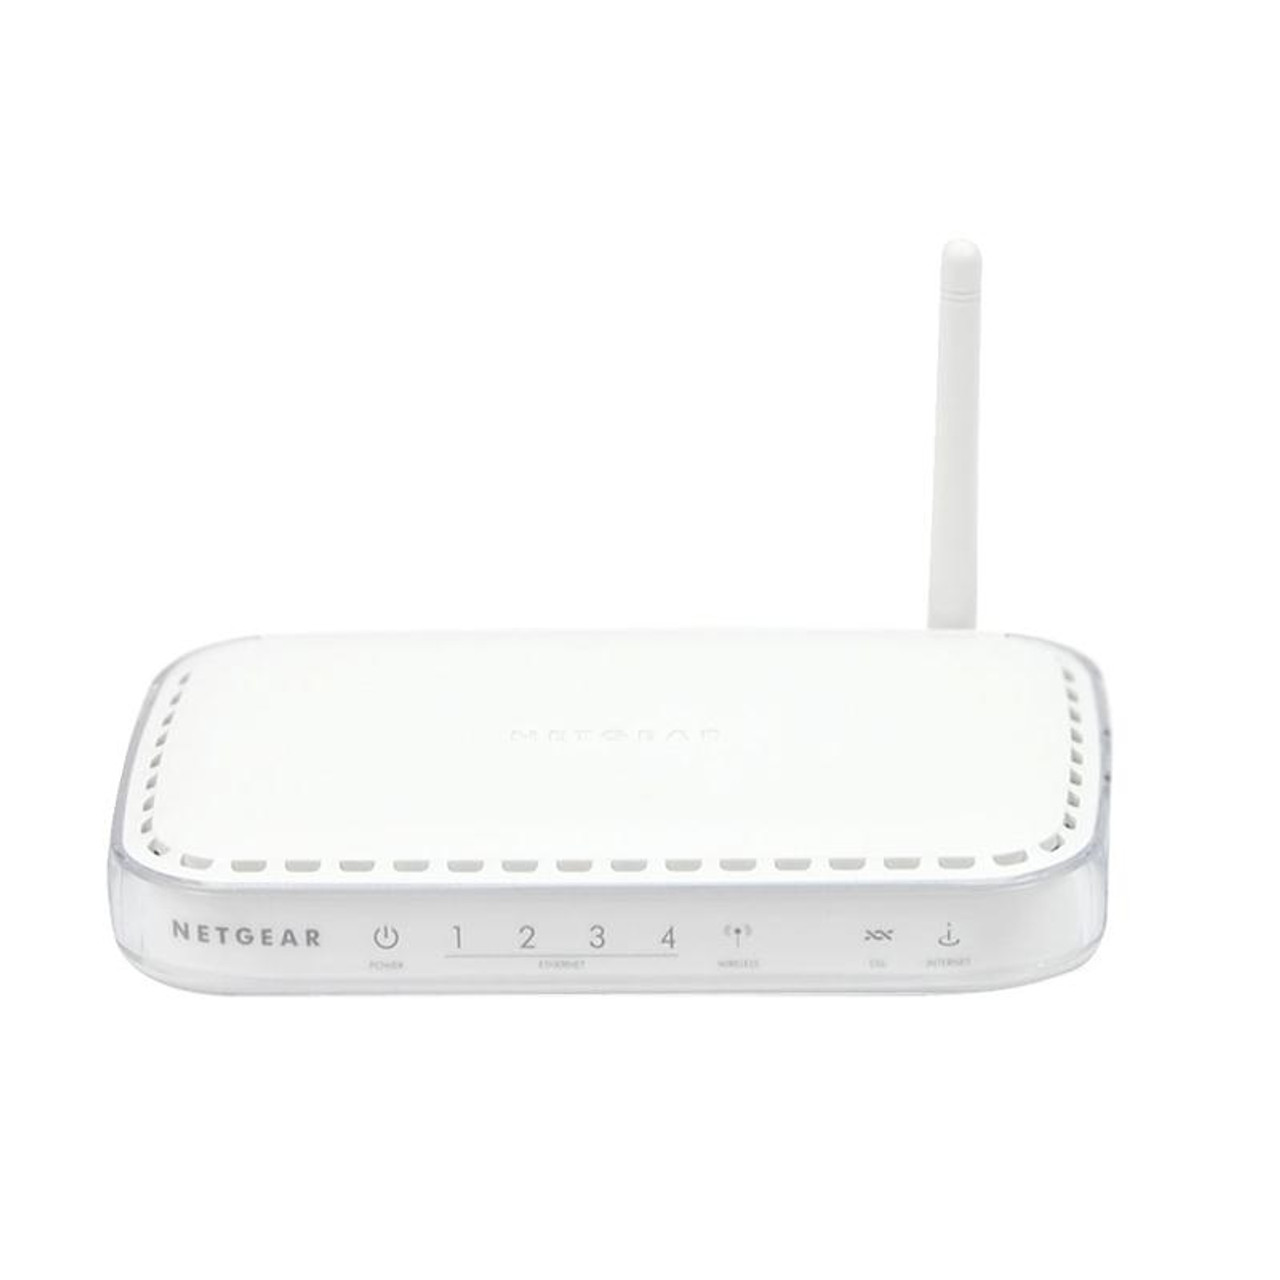 DG834GNA NetGear 54Mbps Wireless ADSL Router with 4-Port Switch (Refurbished)